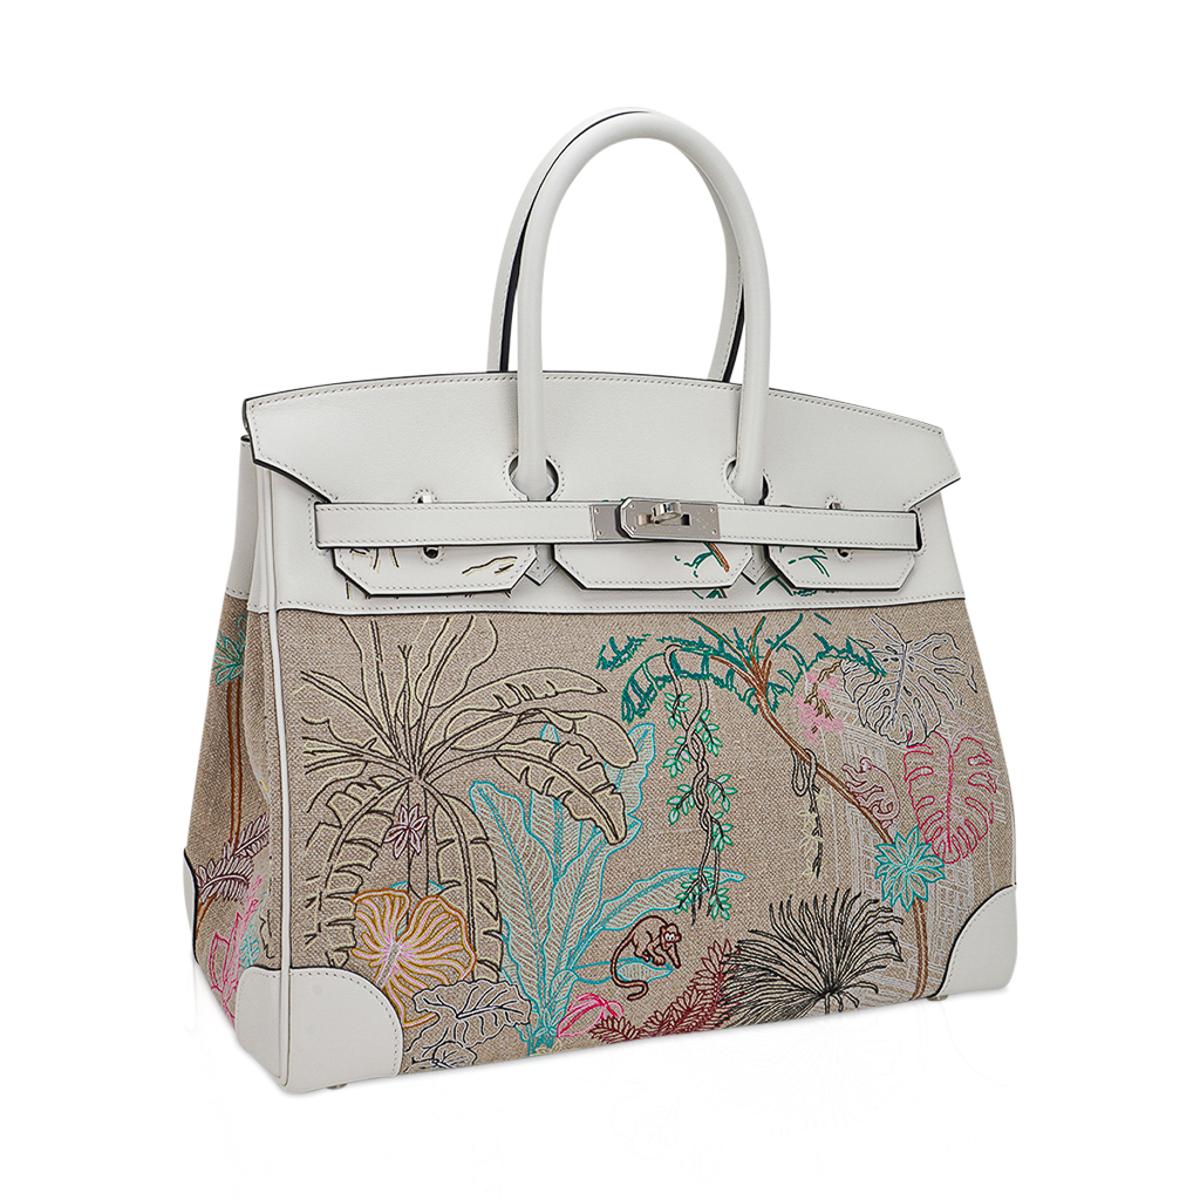 Mightychic offers an Hermes Birkin 35 limited edition bag featured in Faubourg Tropical.
Extremely rare with exquisitely detailed Luneville stitch which took over 200 hours to embroider the textured natural Toile de Camp.
The embroidery flirts with